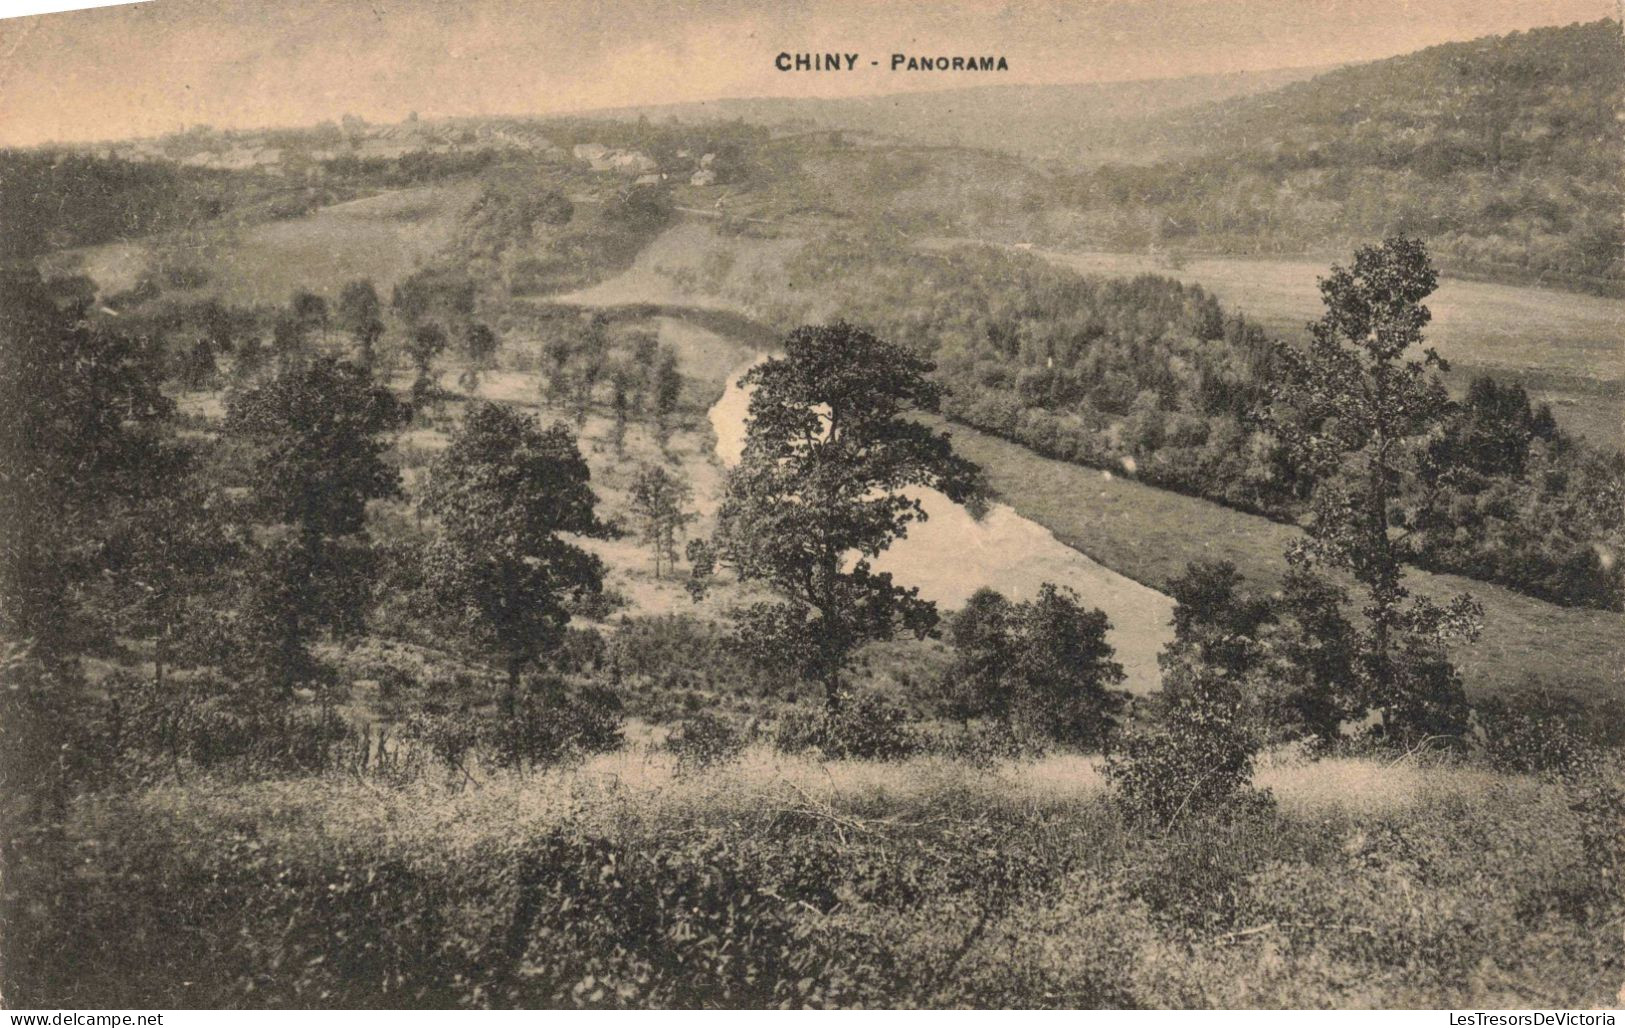 BELGIQUE - Chiny - Panorama - Carte Postale Ancienne - Chiny